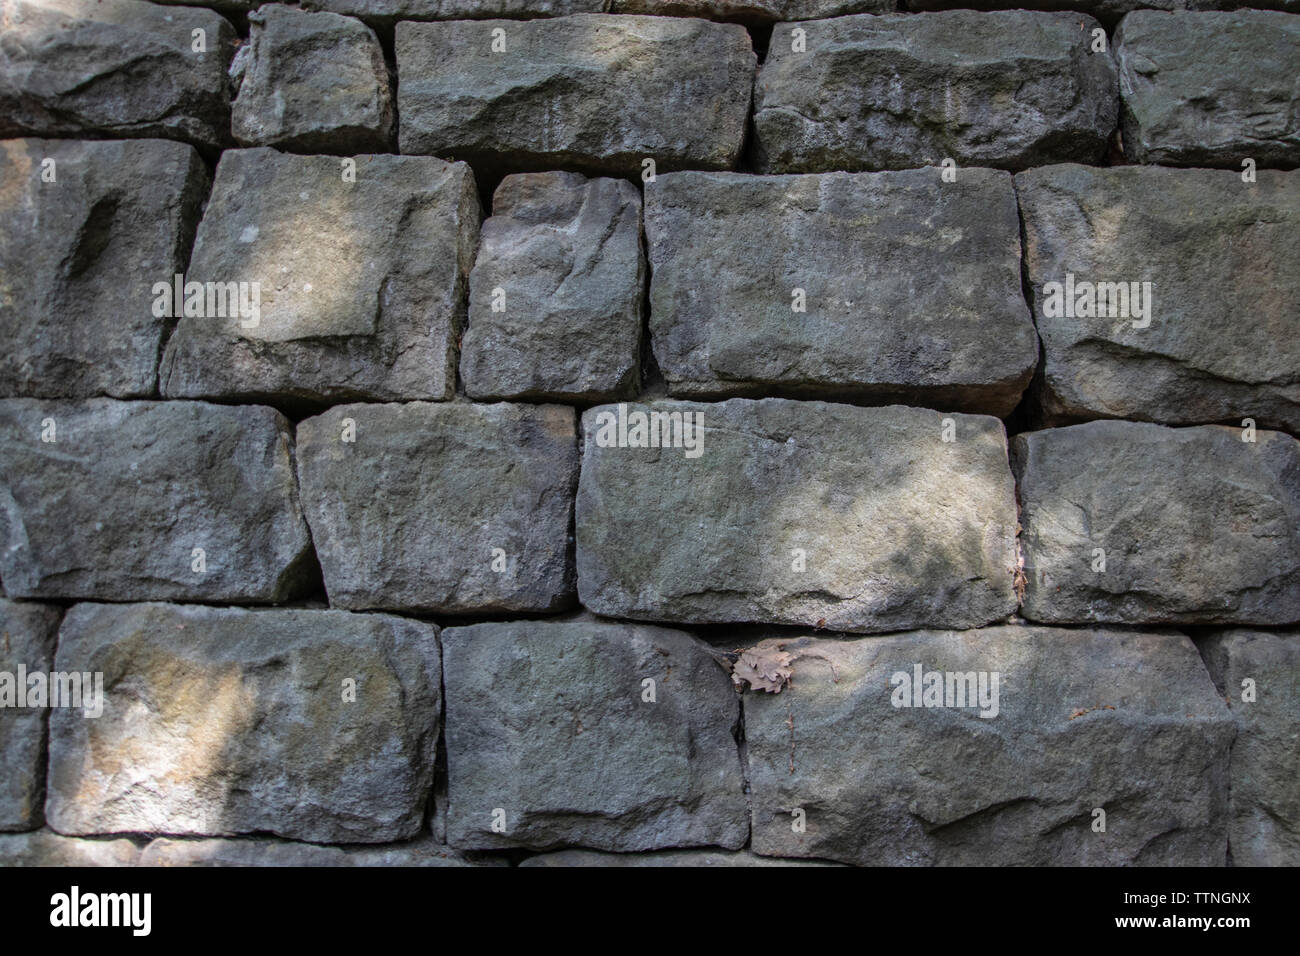 Stone Wall Background Texture And Abstract Wallpaper Dirty And Used Asphalt Pavement Or Street Stock Photo Alamy Find & download free graphic resources for stone wall. https www alamy com stone wall background texture and abstract wallpaper dirty and used asphalt pavement or street image256171046 html